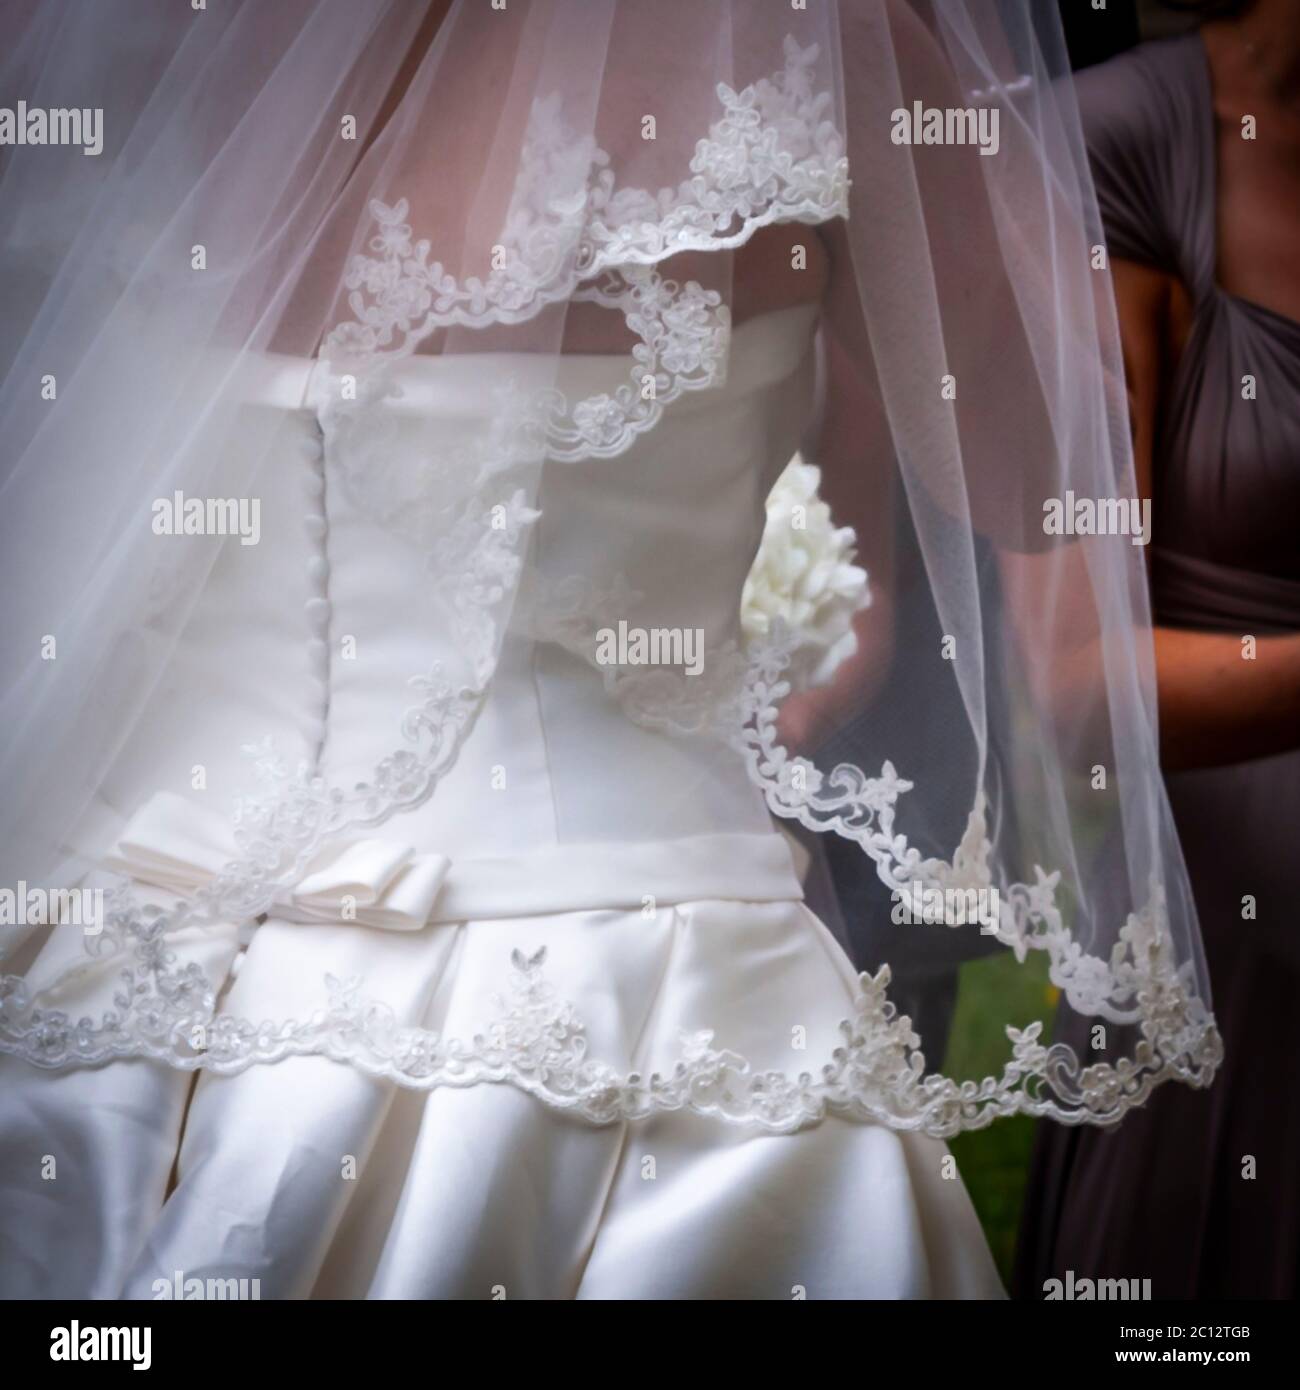 The lace bridal veil from behind. British Wedding in South Cambridgeshire, England Stock Photo